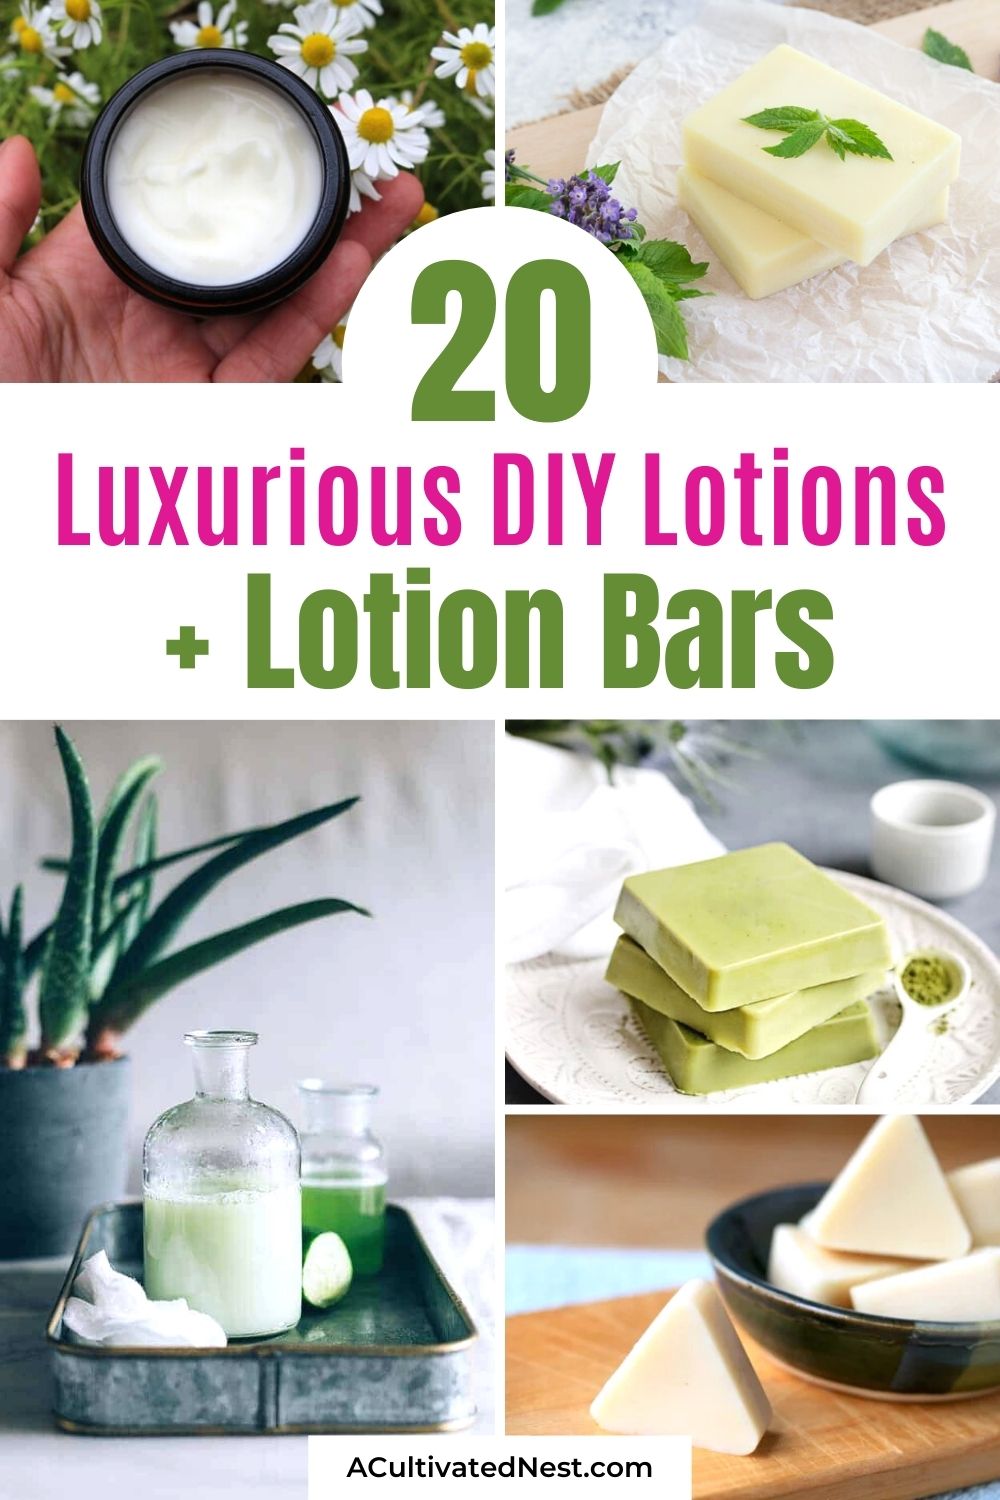 20 Luxurious DIY Lotions and Lotion Bars